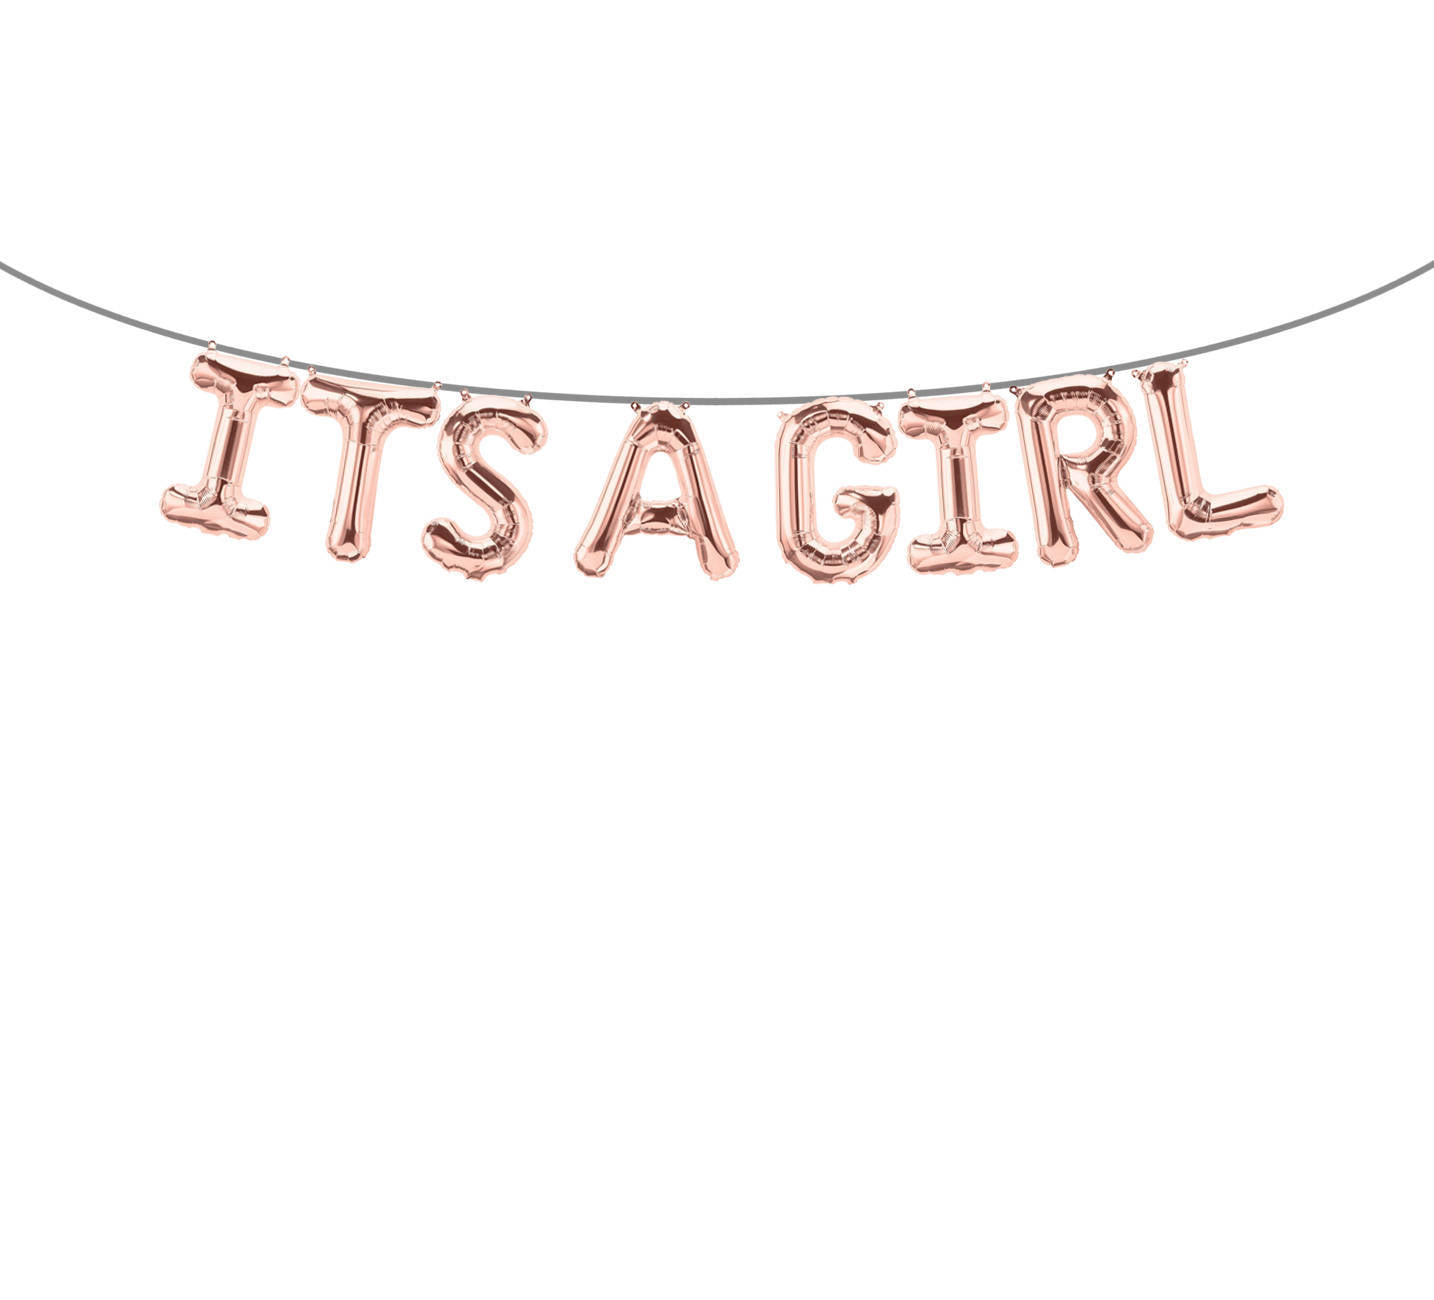 ITS A GIRL Rose Gold Foil Balloon 16" For Baby Shower Gender Reveal